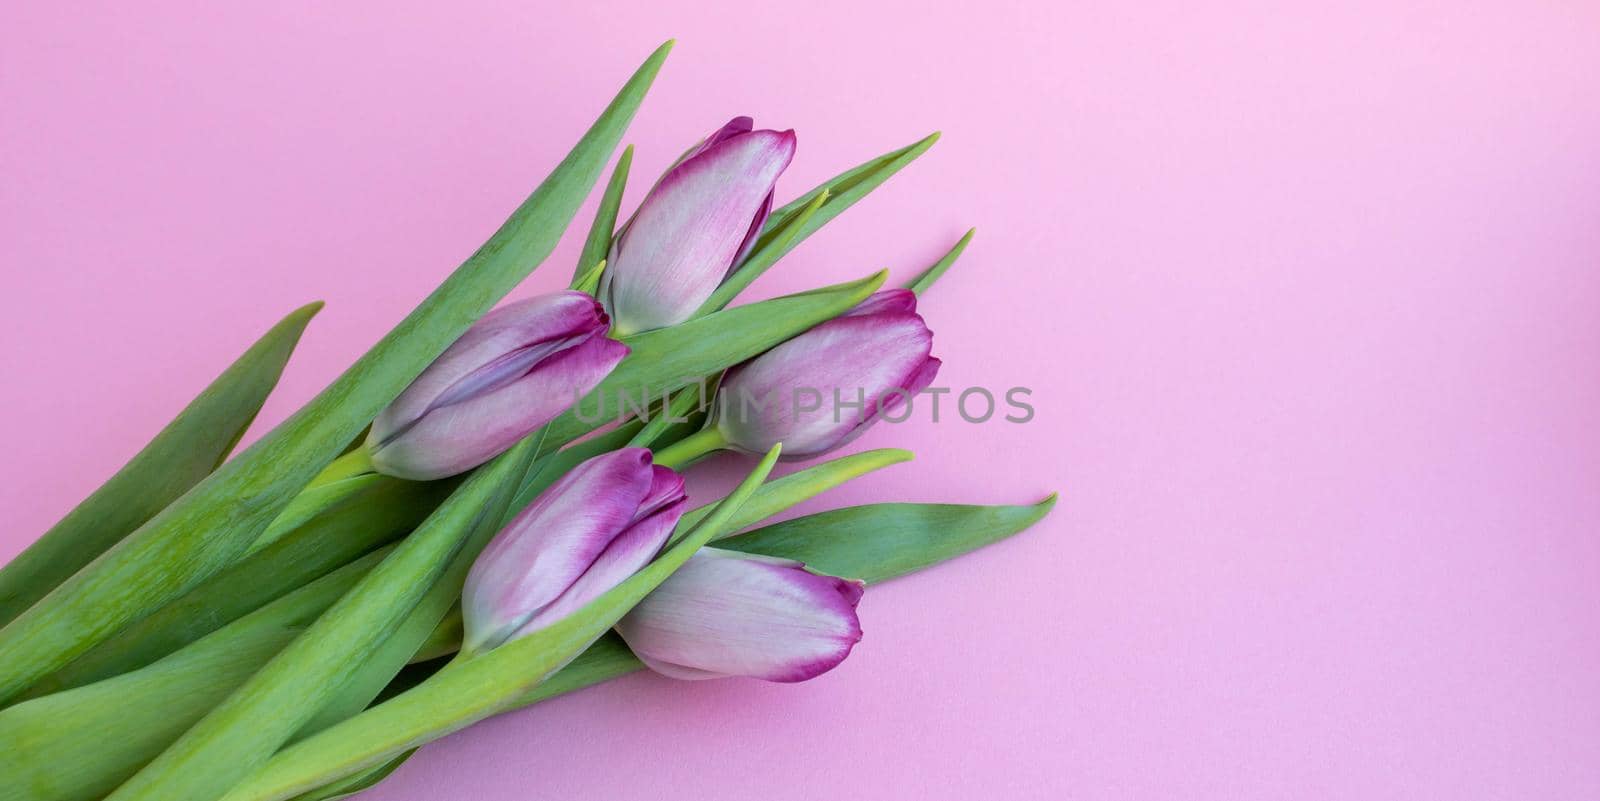 Delicate lilac tulips on a pink background. Greeting card, wallpaper, background. Happy Mother's Day, Easter, Valentine's Day, or wedding.